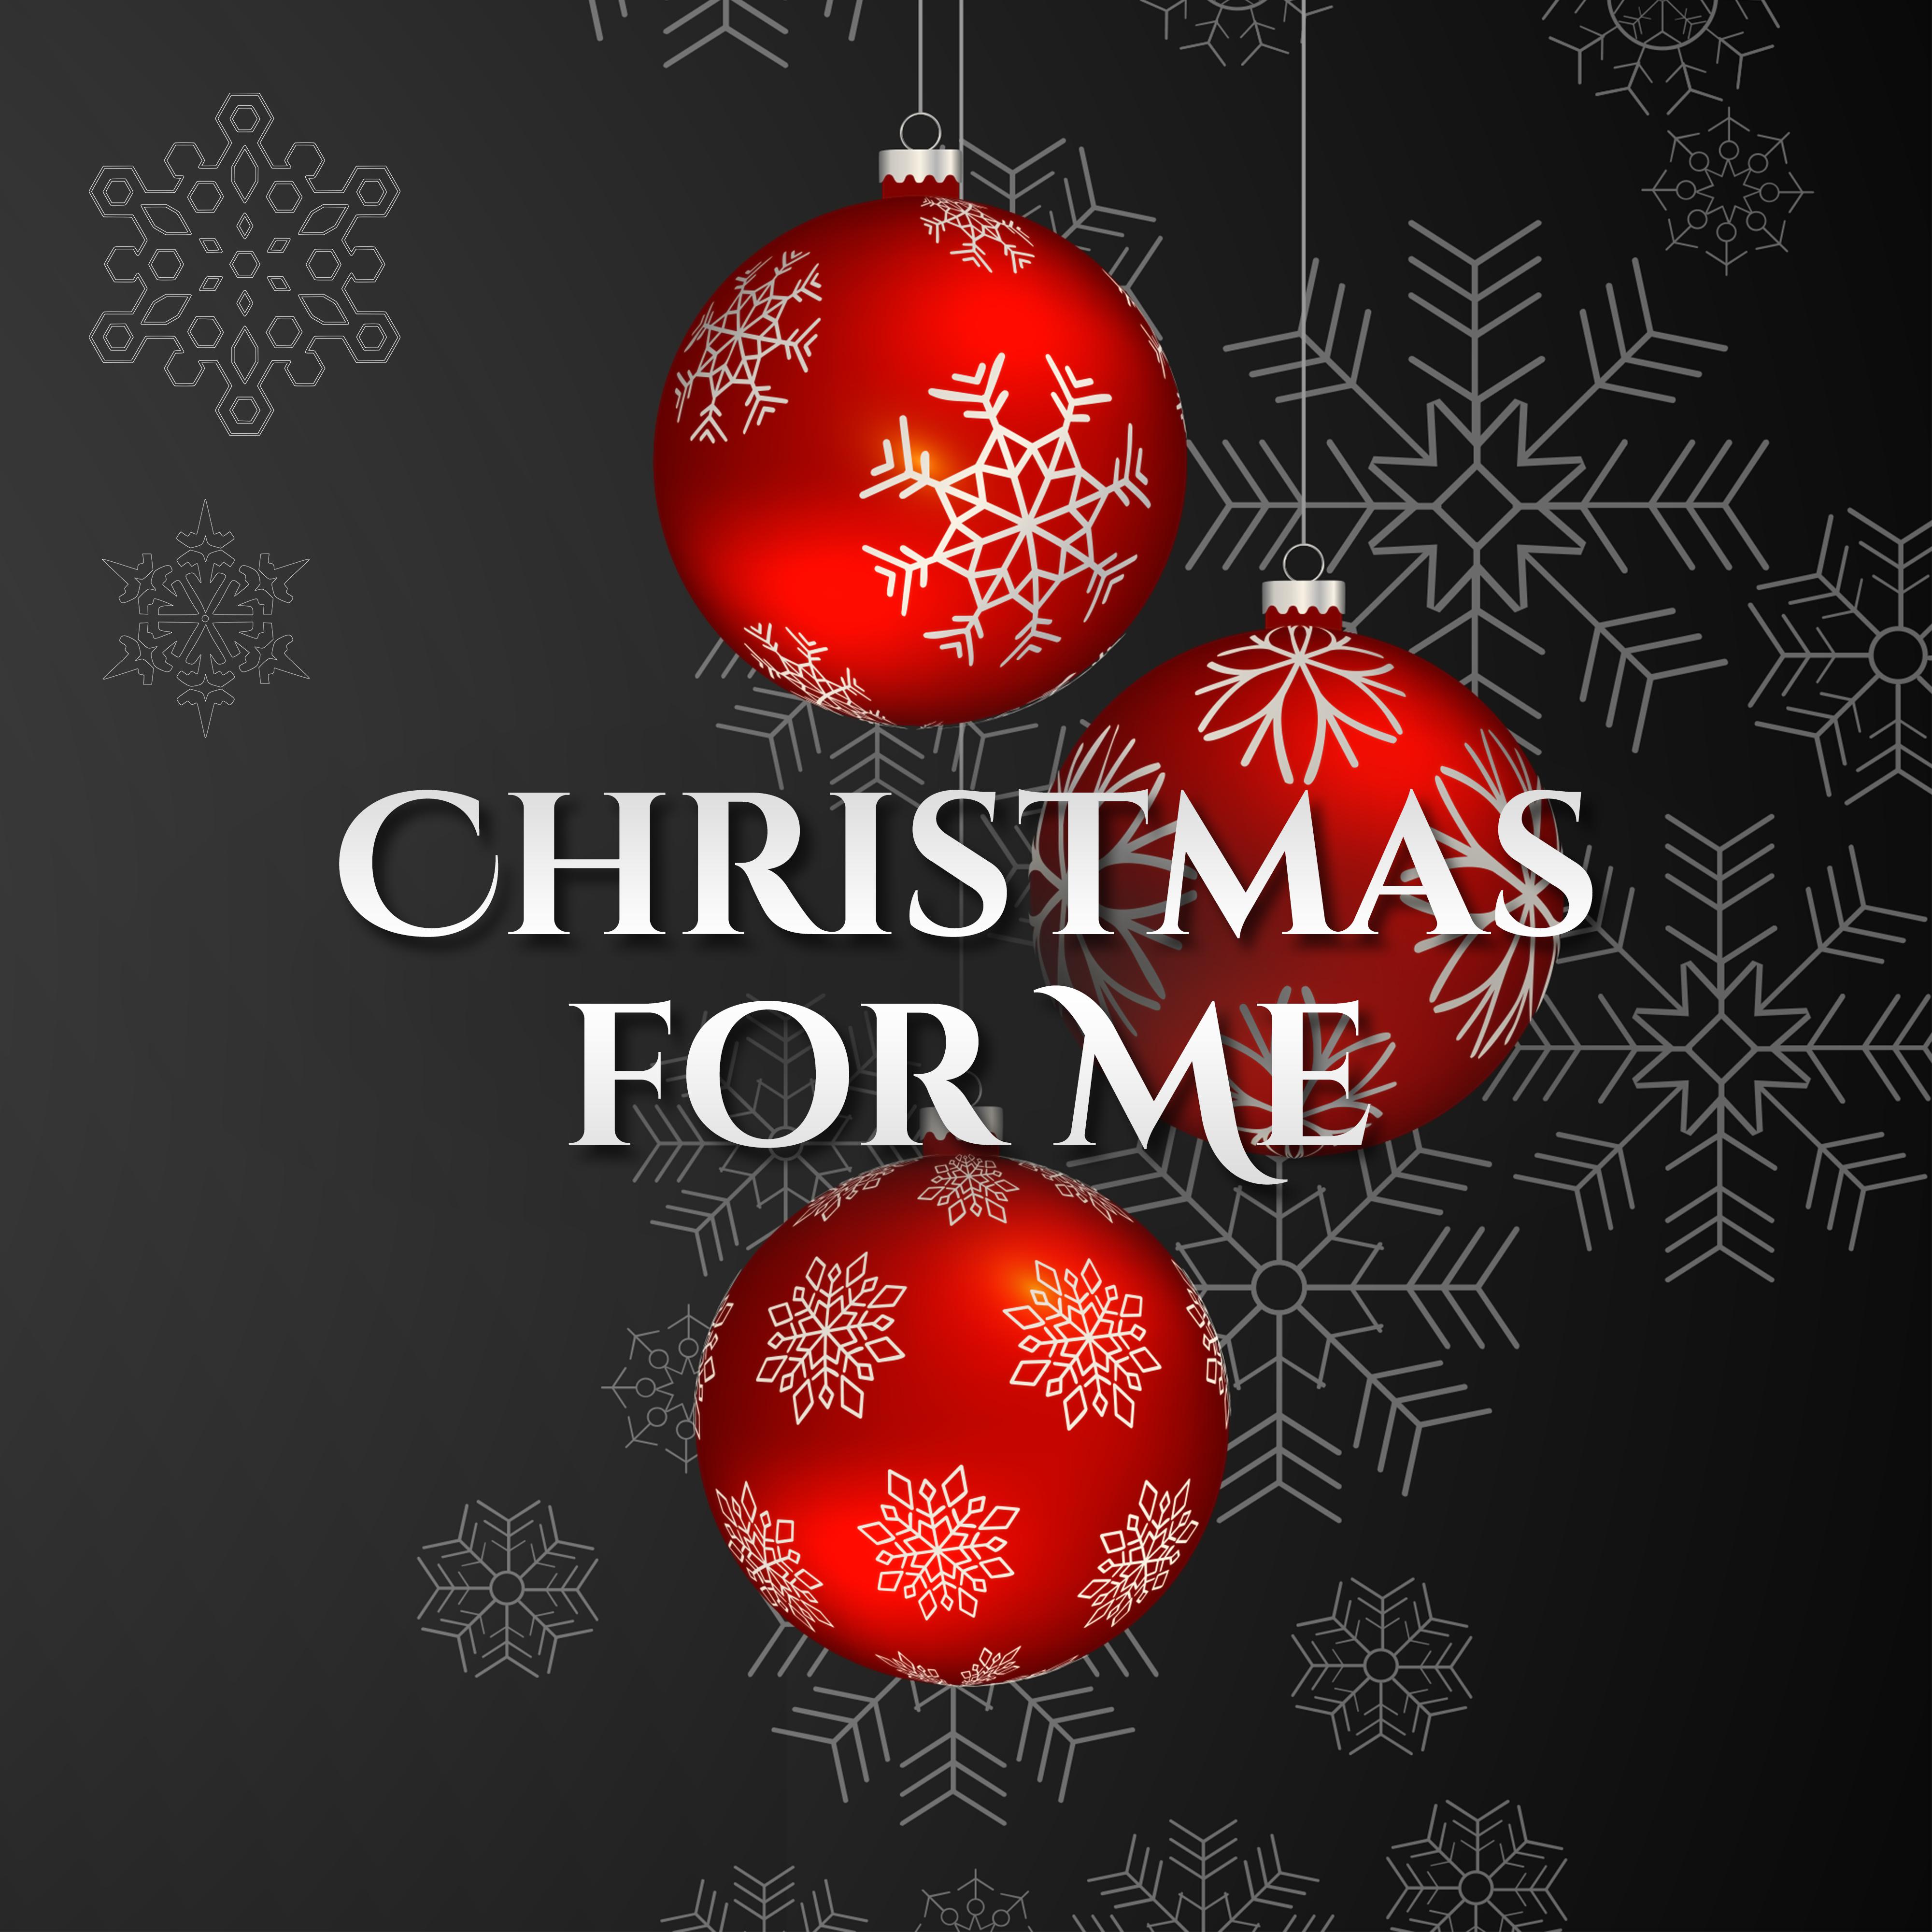 Christmas for Me - Angels in Snow, Song in My Heart, Candles Glowing in Dark, Joy of Family, Love at Christmas, Presents underneath Christmas Tree, Kisses under Mistletoe